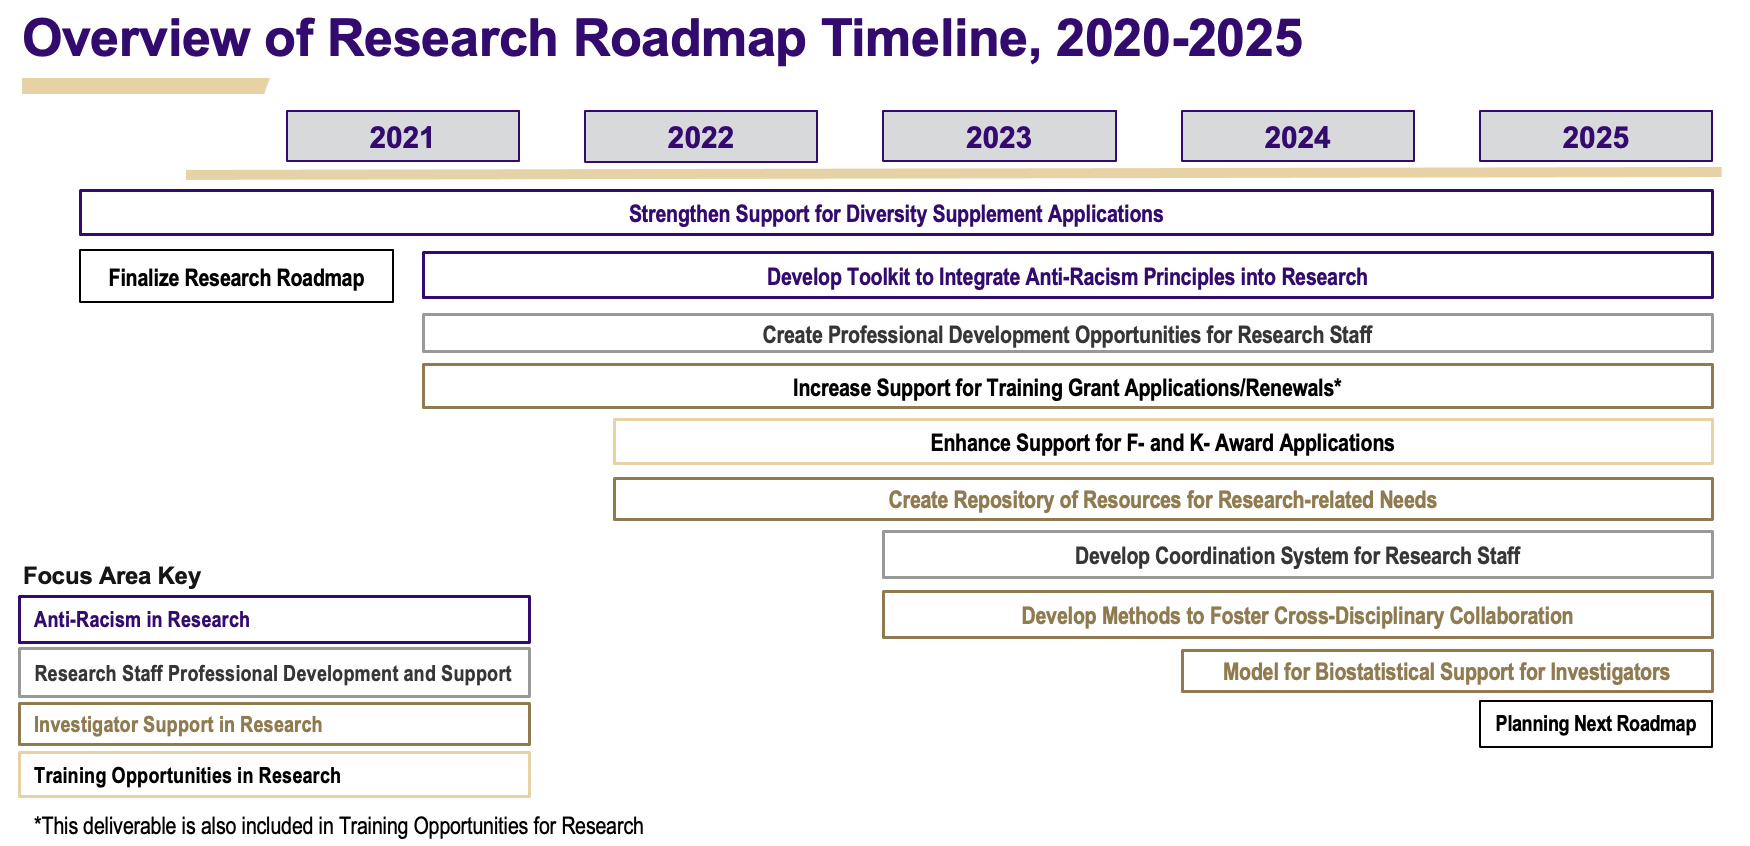 Overview of Research Roadmap Timeline